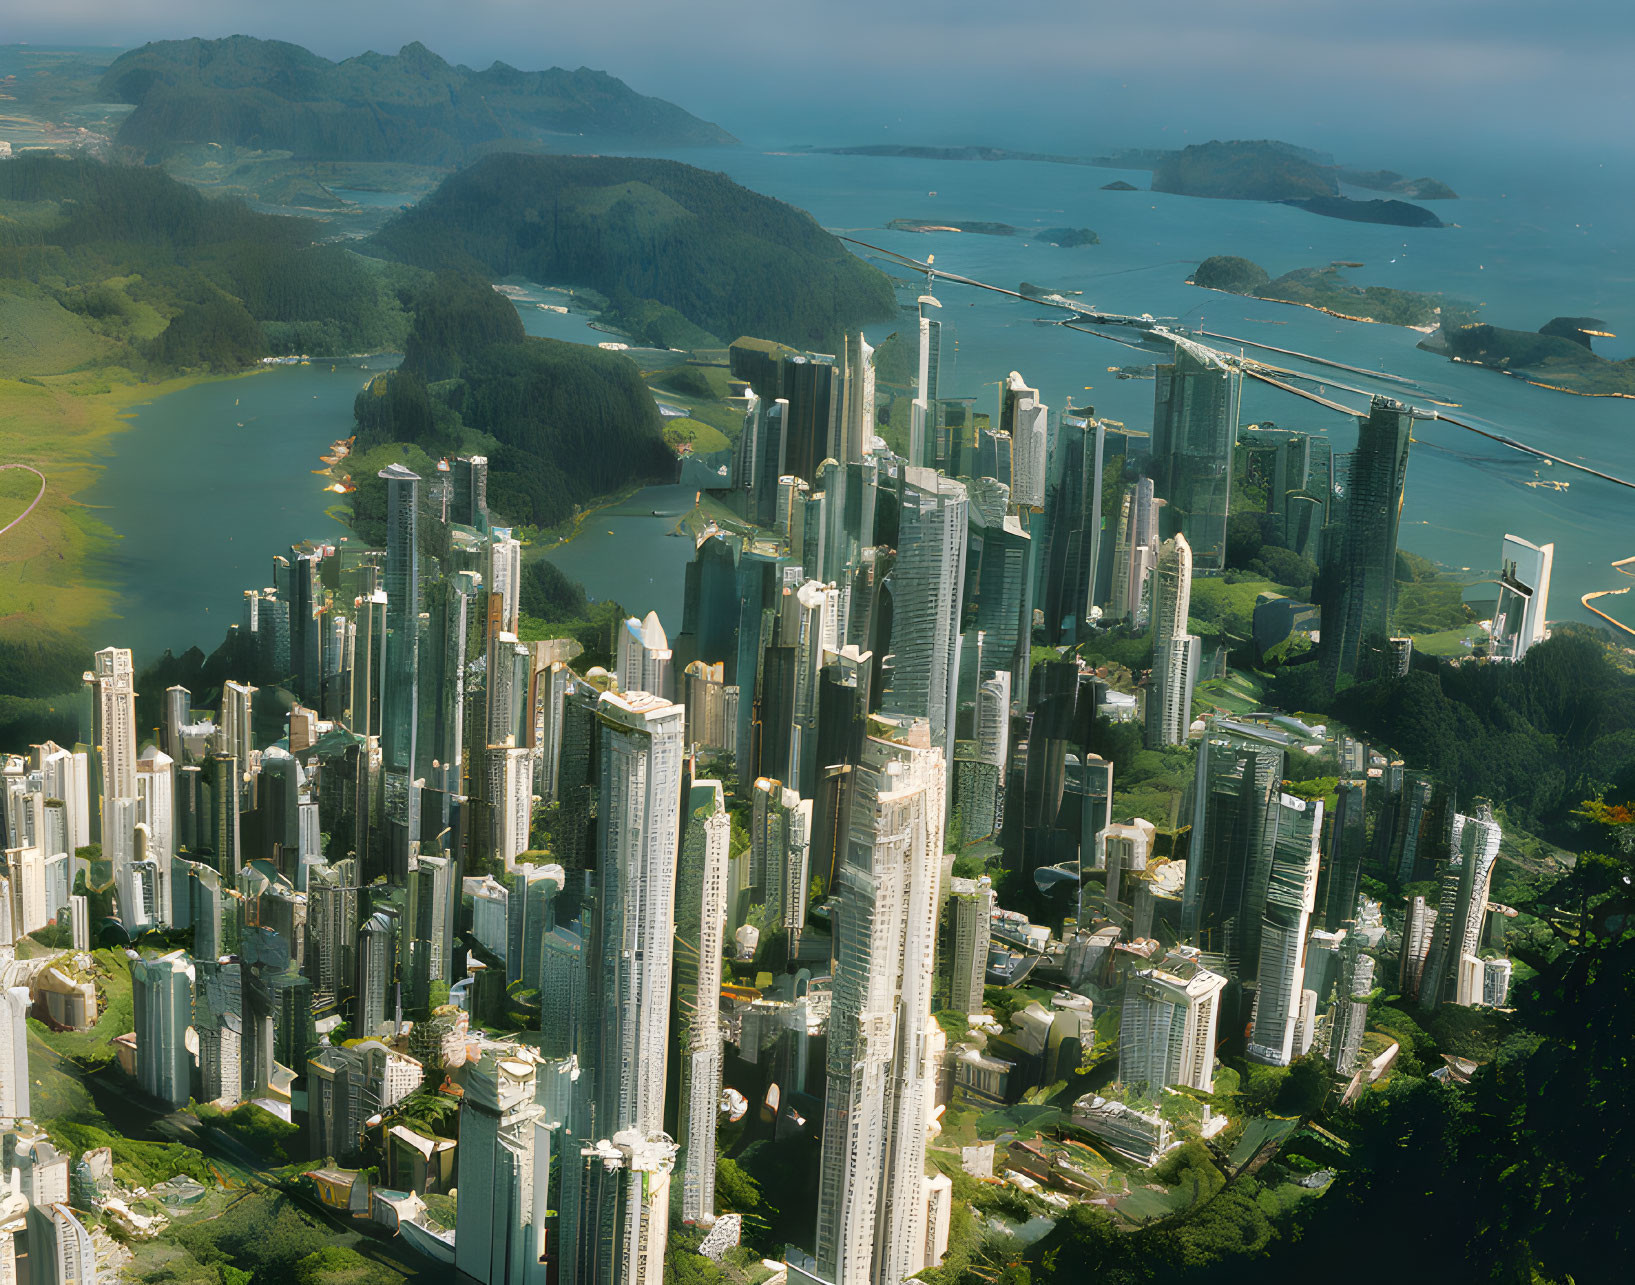 Modern Coastal City with High-rise Buildings and Ocean Views